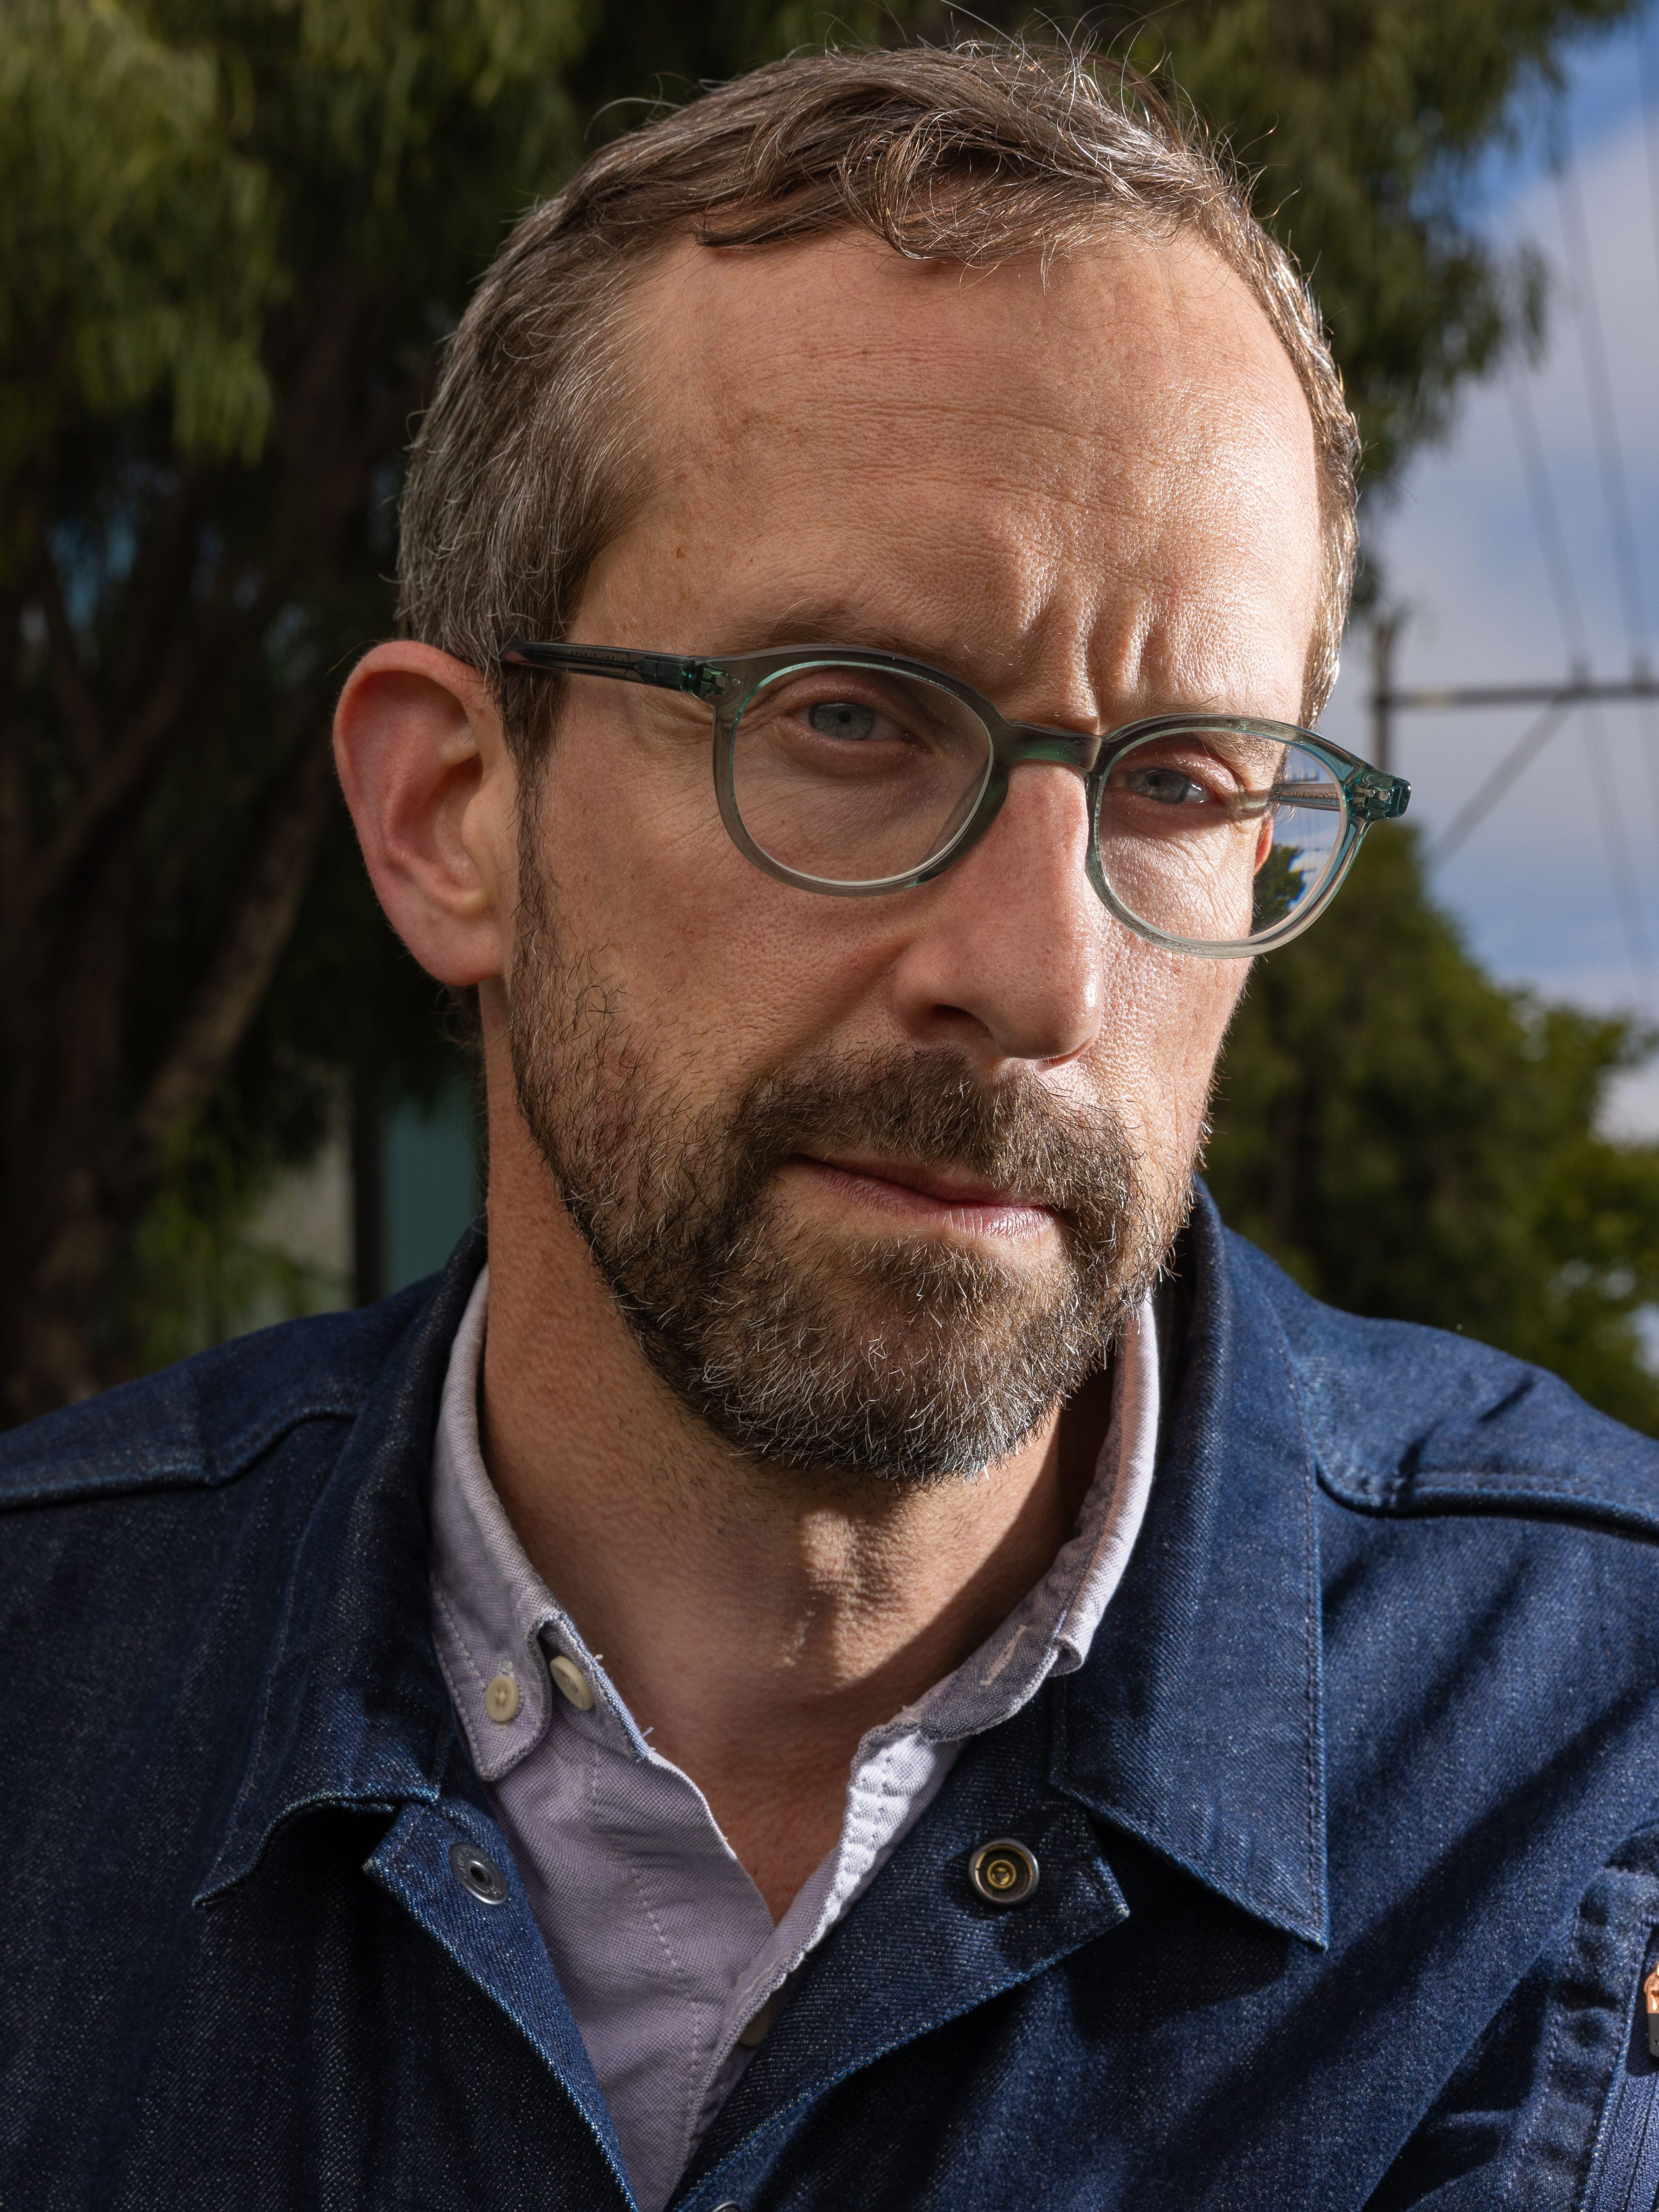 A man with glasses and a beard, wearing a denim jacket over a light-colored shirt, stands outdoors. Trees, a building, and power lines are visible in the background.